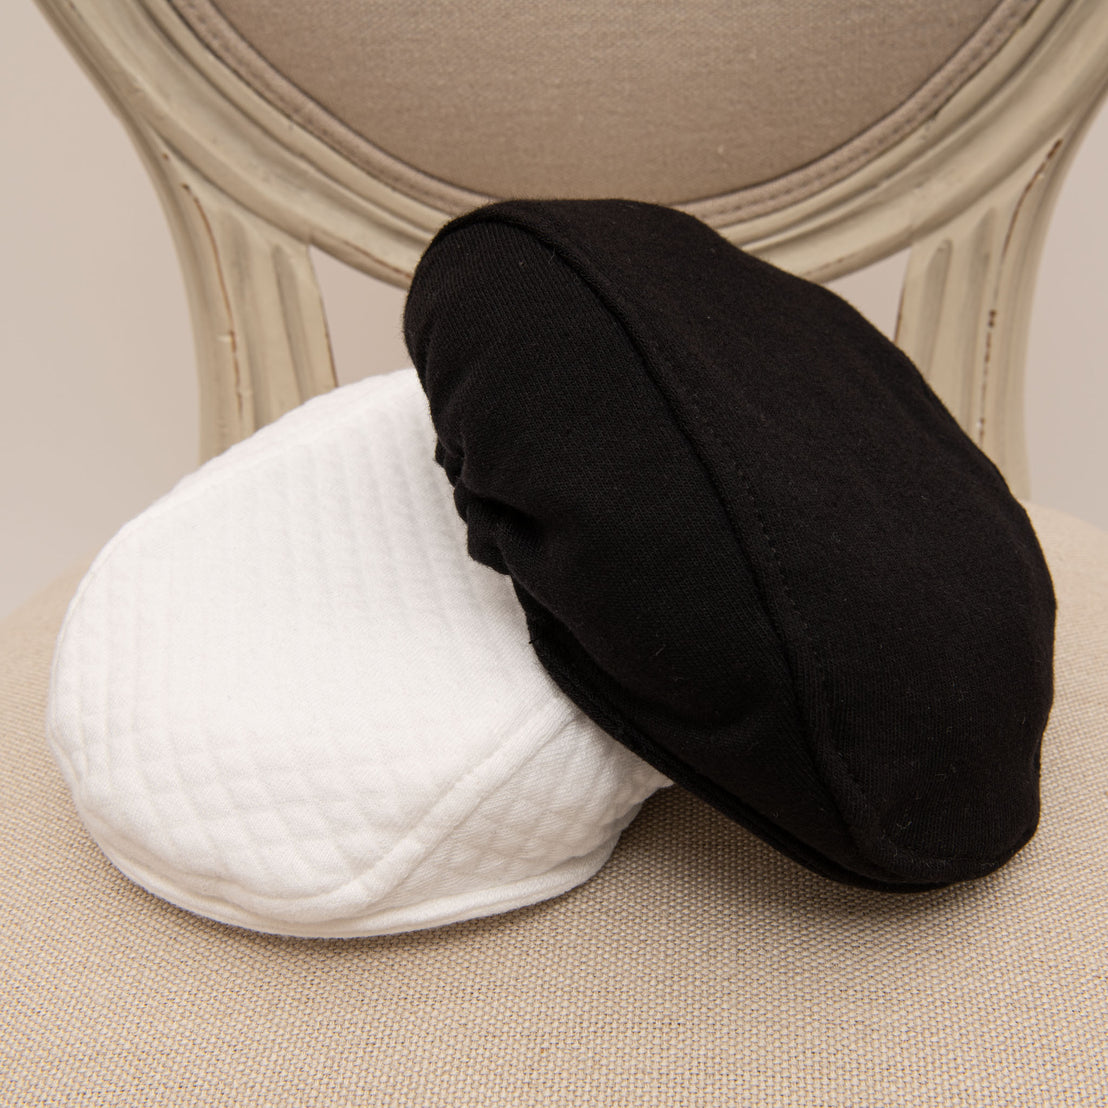 Flat lay photo of both the black and white James Newsboy Cap.